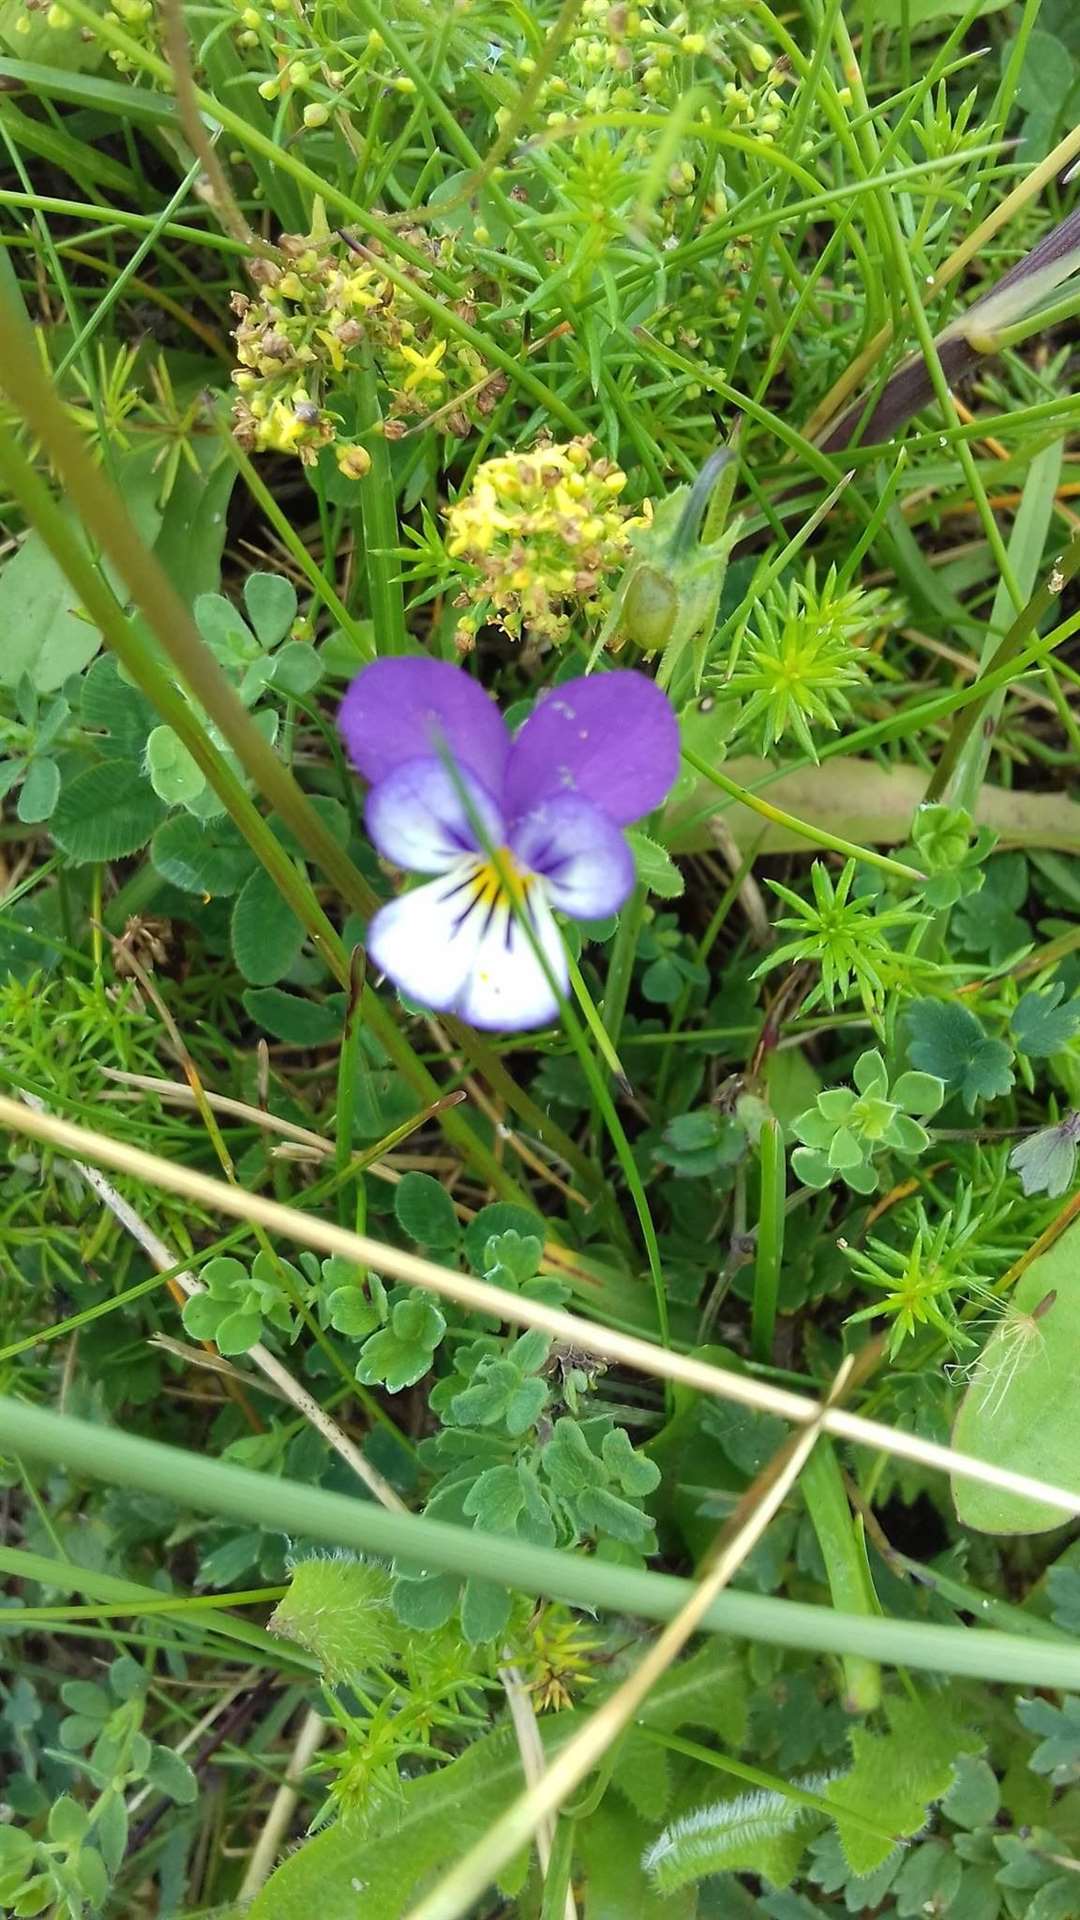 Ellon's biodiversity can be seen in the mix of wildflowers to be found round the town.